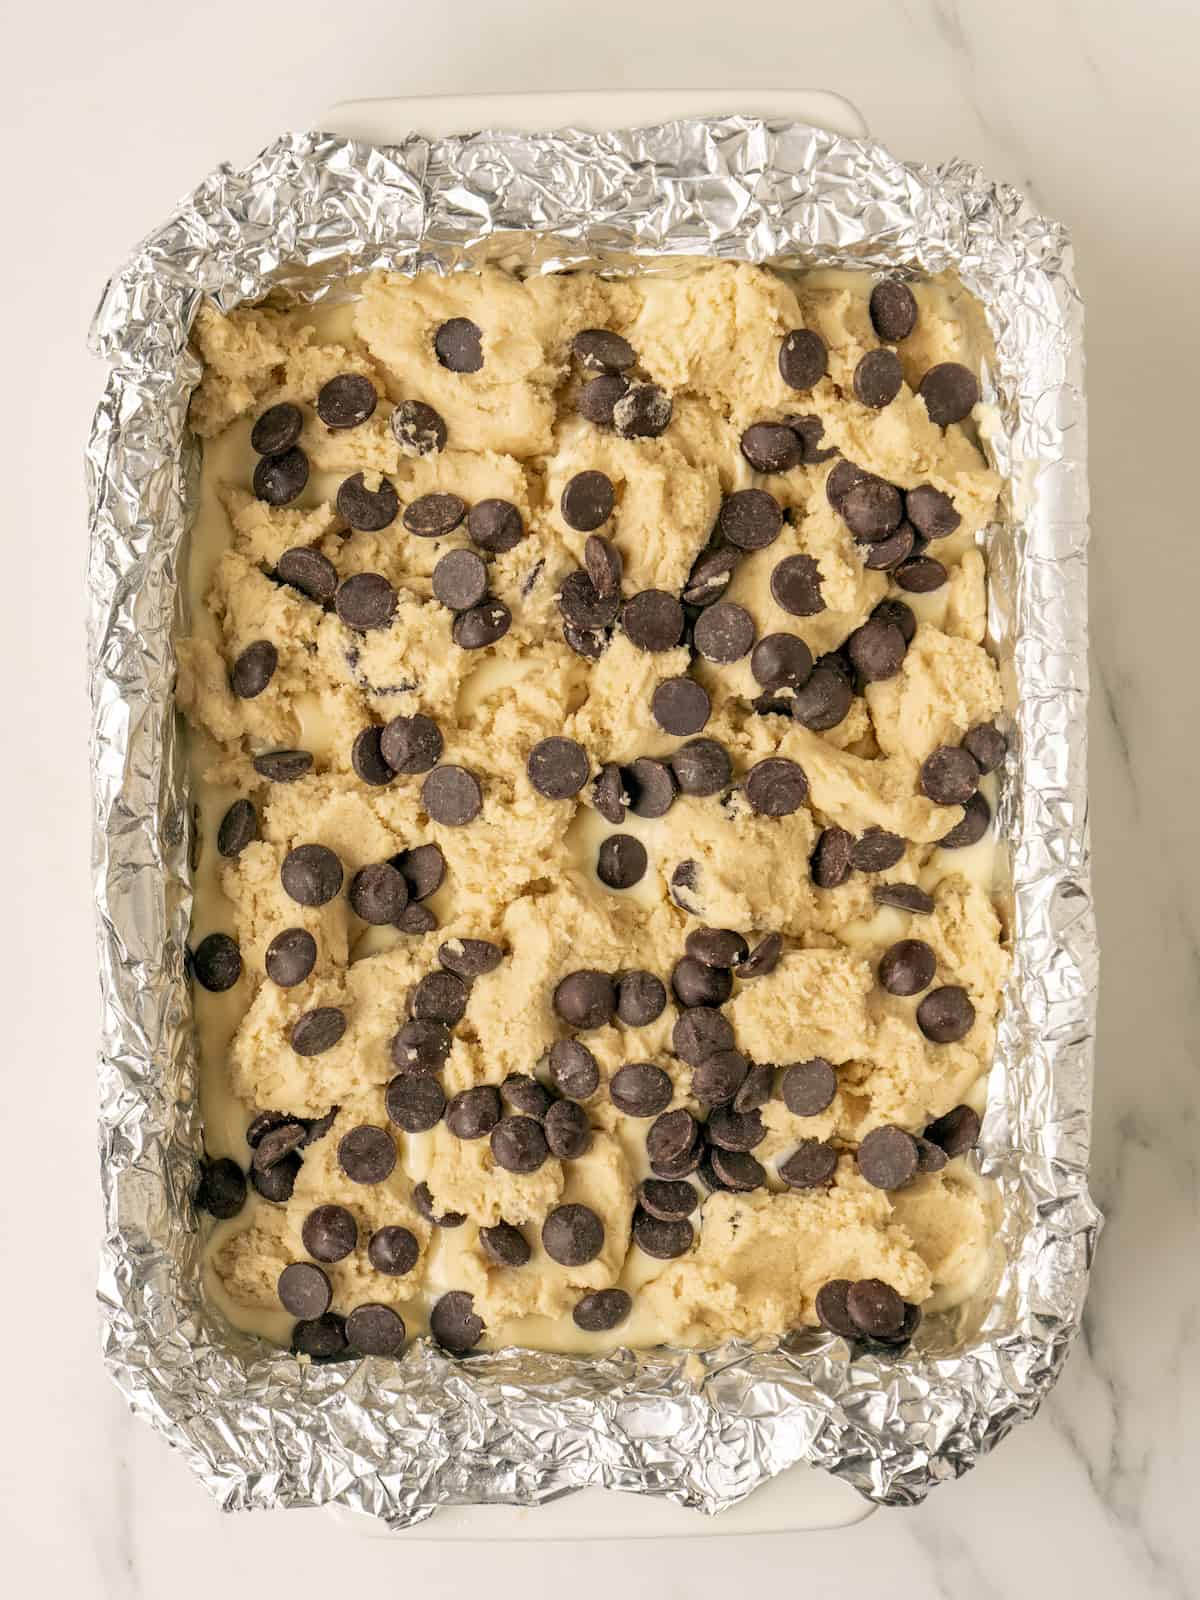 A 9x13 baking pan lined with tin foil with crumbled cookie dough sprinkled all over the cookie dough and cream cheese mixture layers below, and a final layer of chocolate chips sprinkled on top.